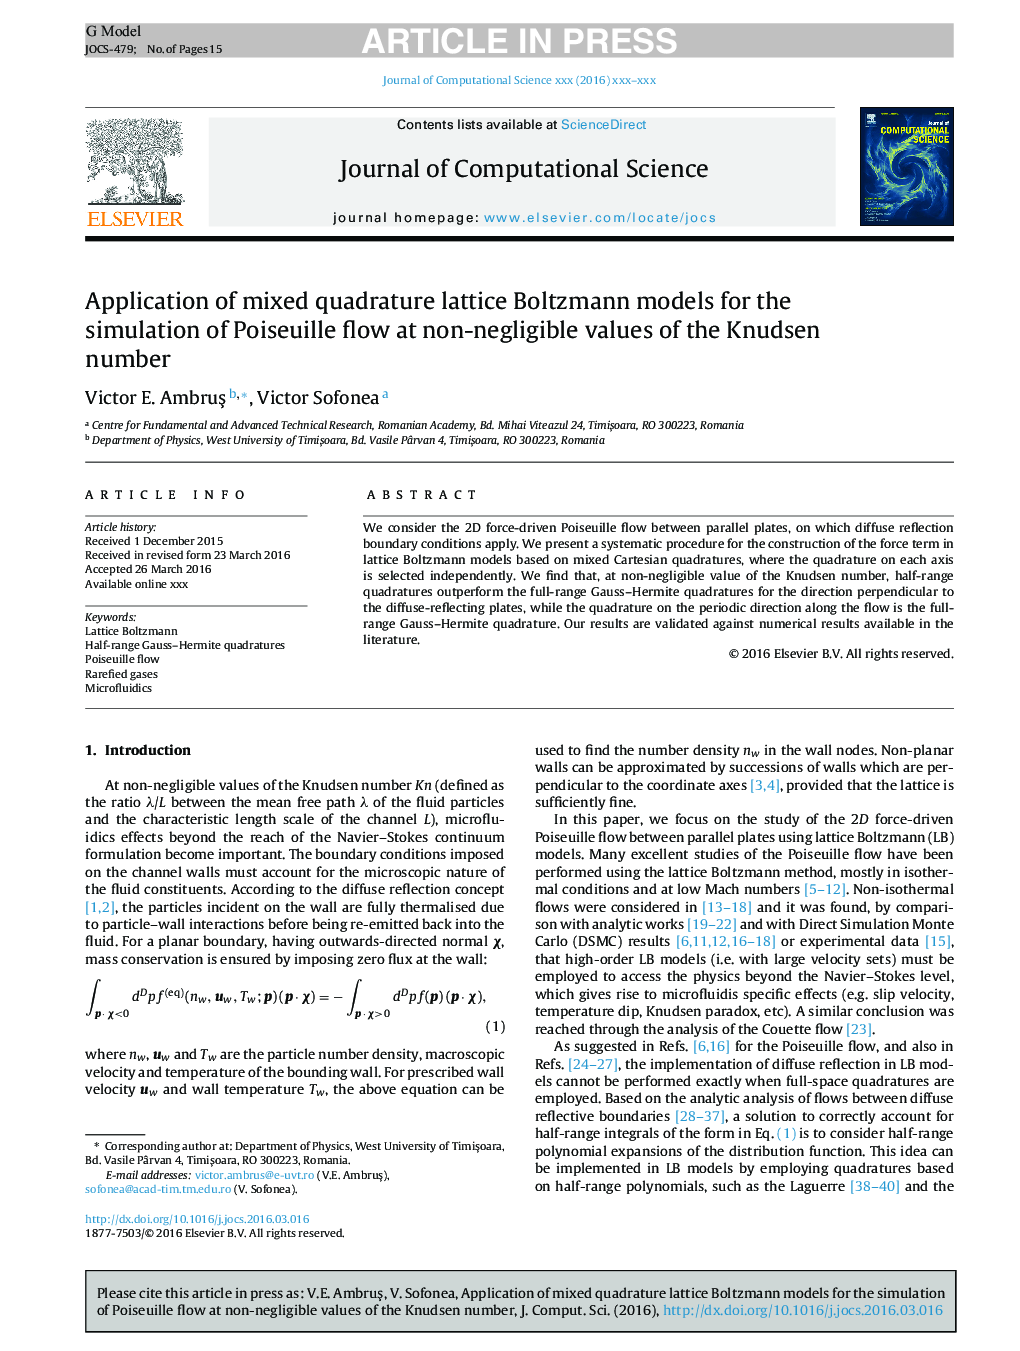 Application of mixed quadrature lattice Boltzmann models for the simulation of Poiseuille flow at non-negligible values of the Knudsen number